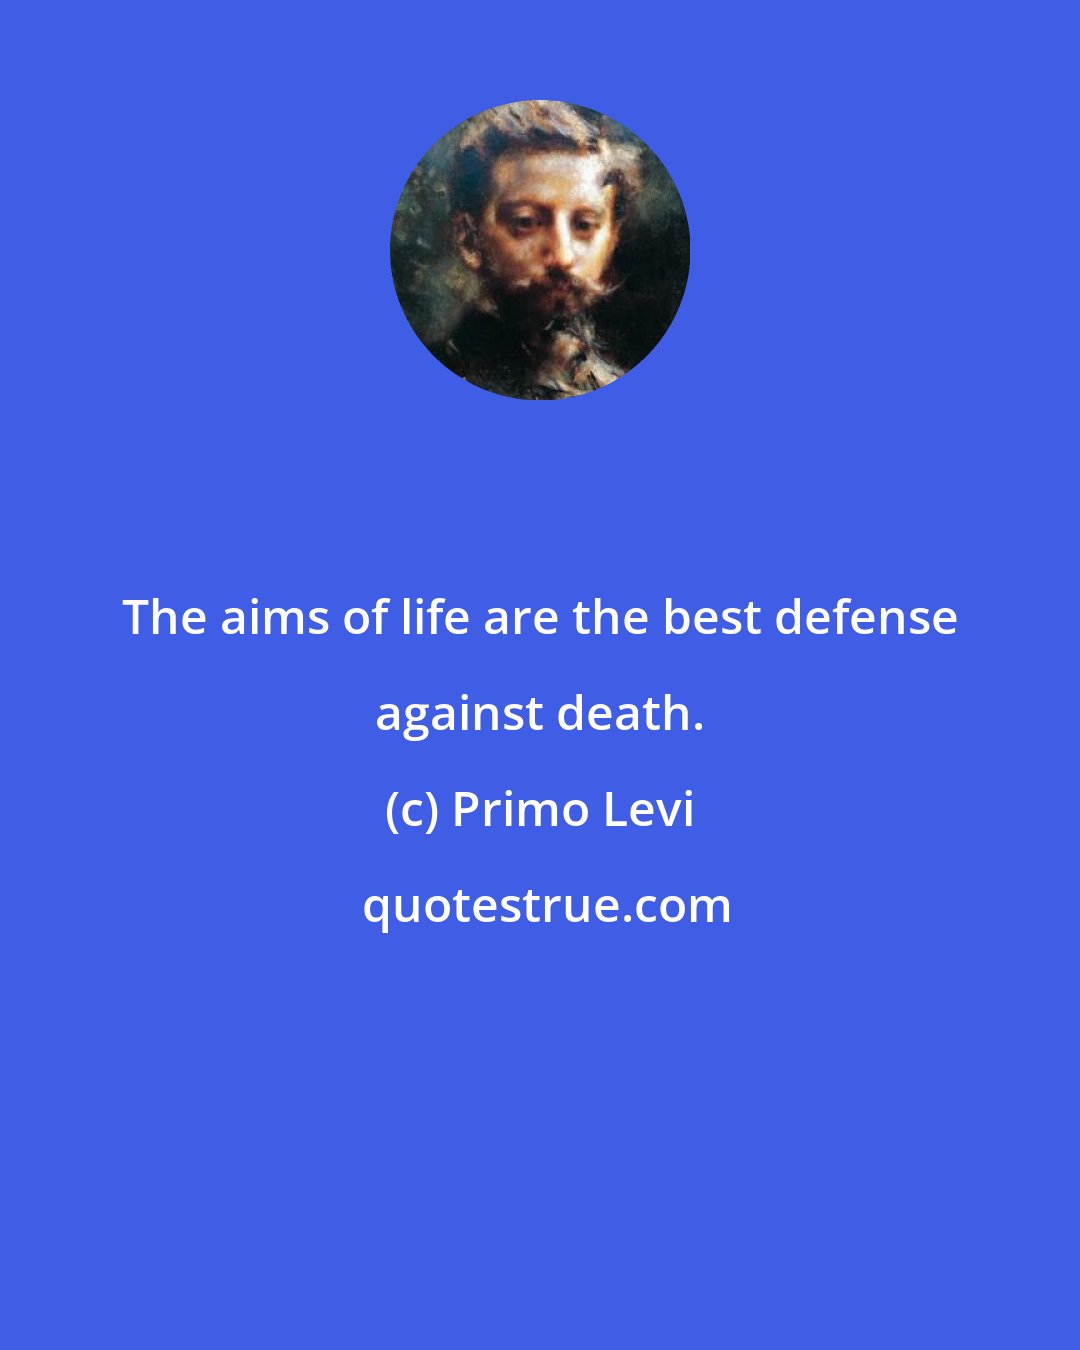 Primo Levi: The aims of life are the best defense against death.